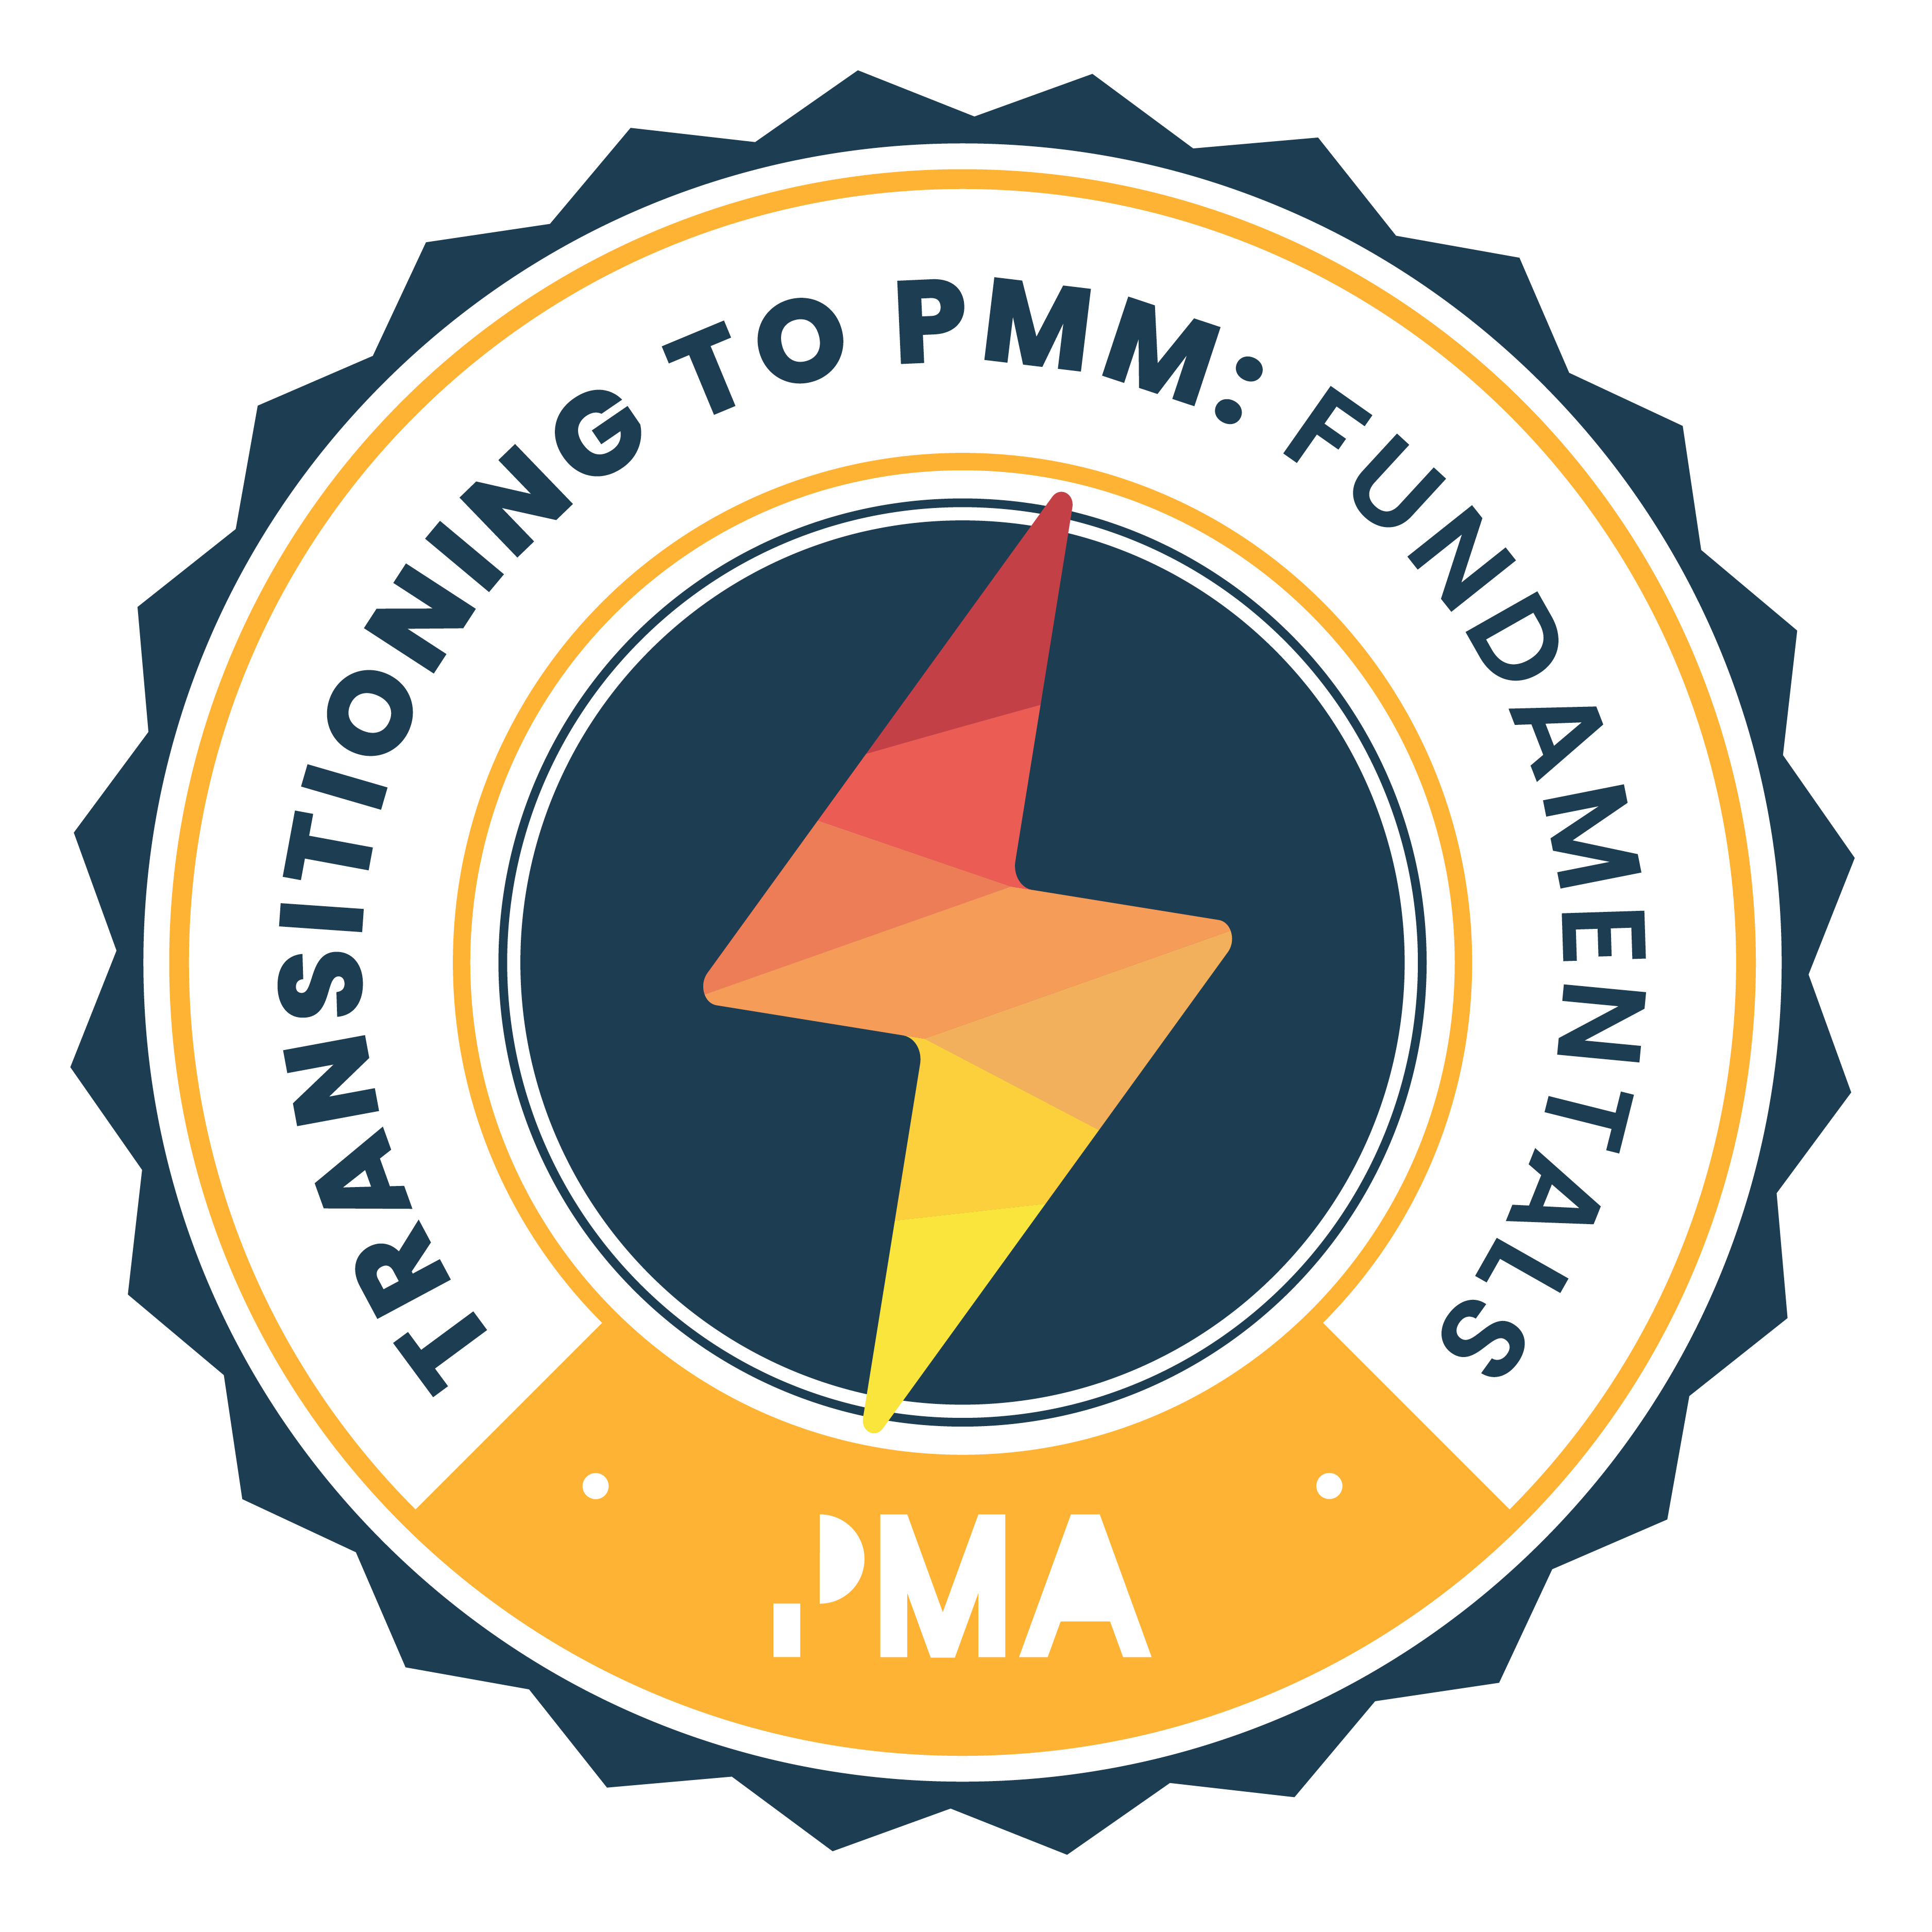 Transitioning to PMM badge